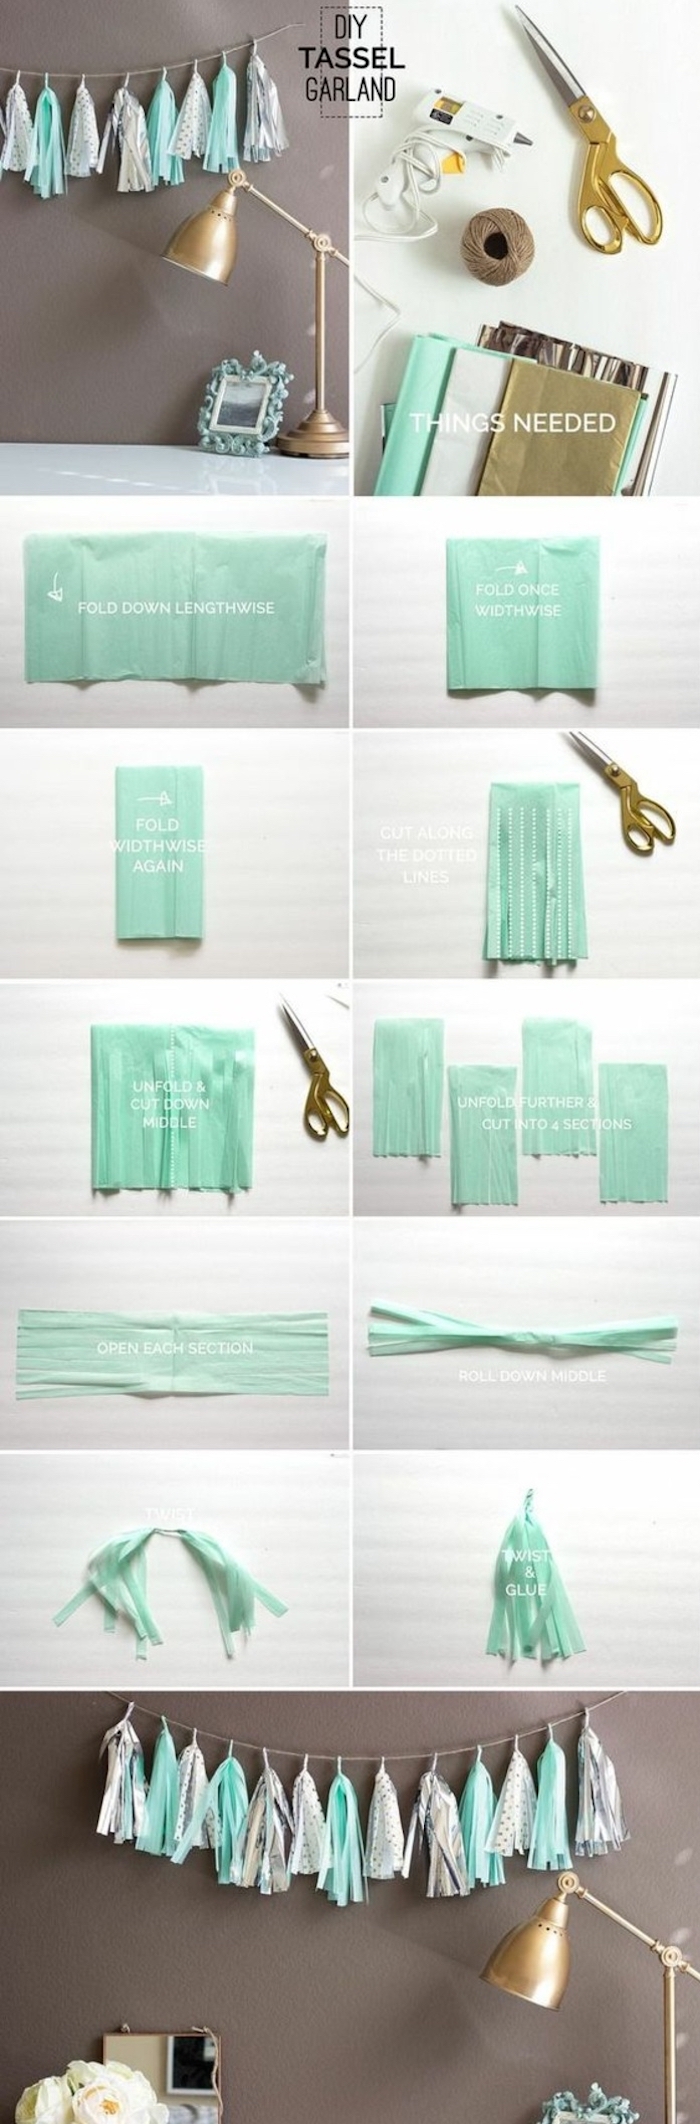 tassel garland, cool diy projects, step by step, diy tutorial, turquoise and grey paper